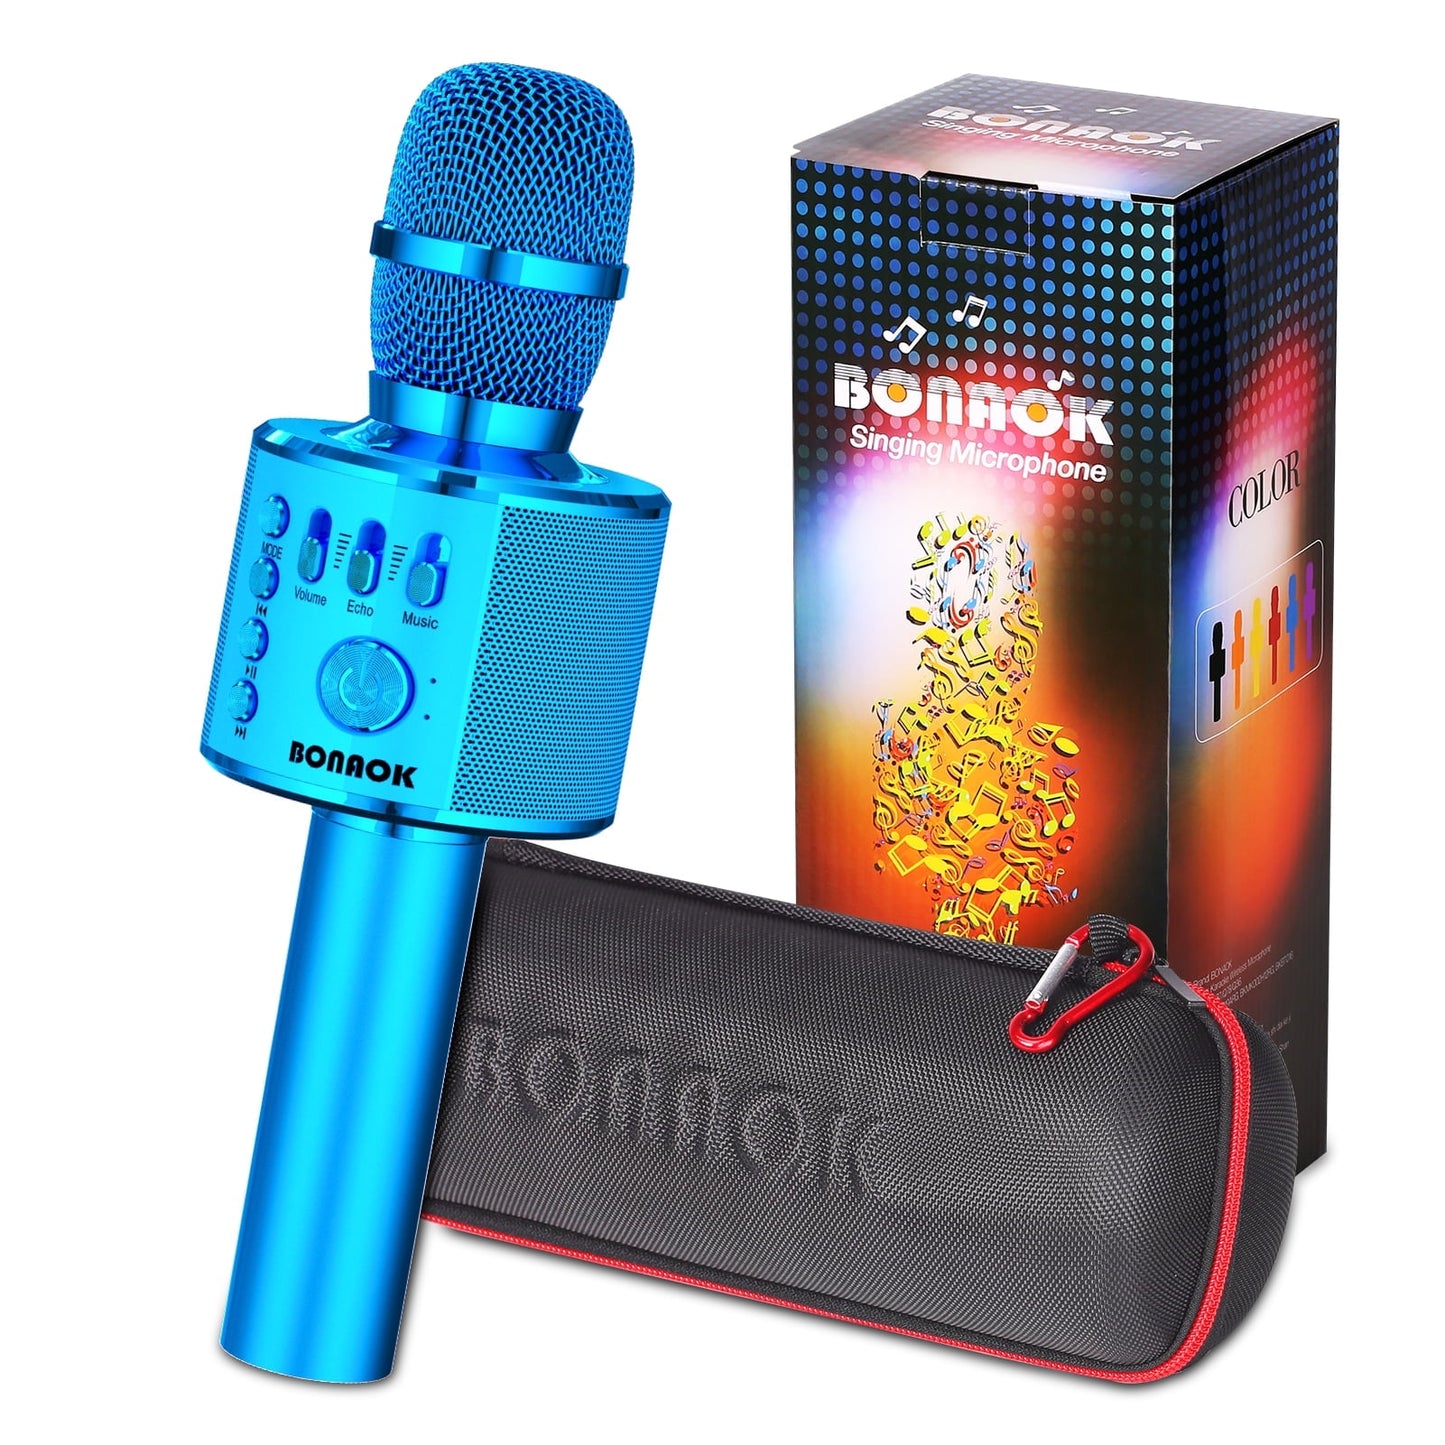 BONAOK Wireless Bluetooth Karaoke Microphone, 3-in-1 Portable Handheld Mic Speaker for All Smartphones,Gifts for Kids Adults Q37 (Rose Gold)